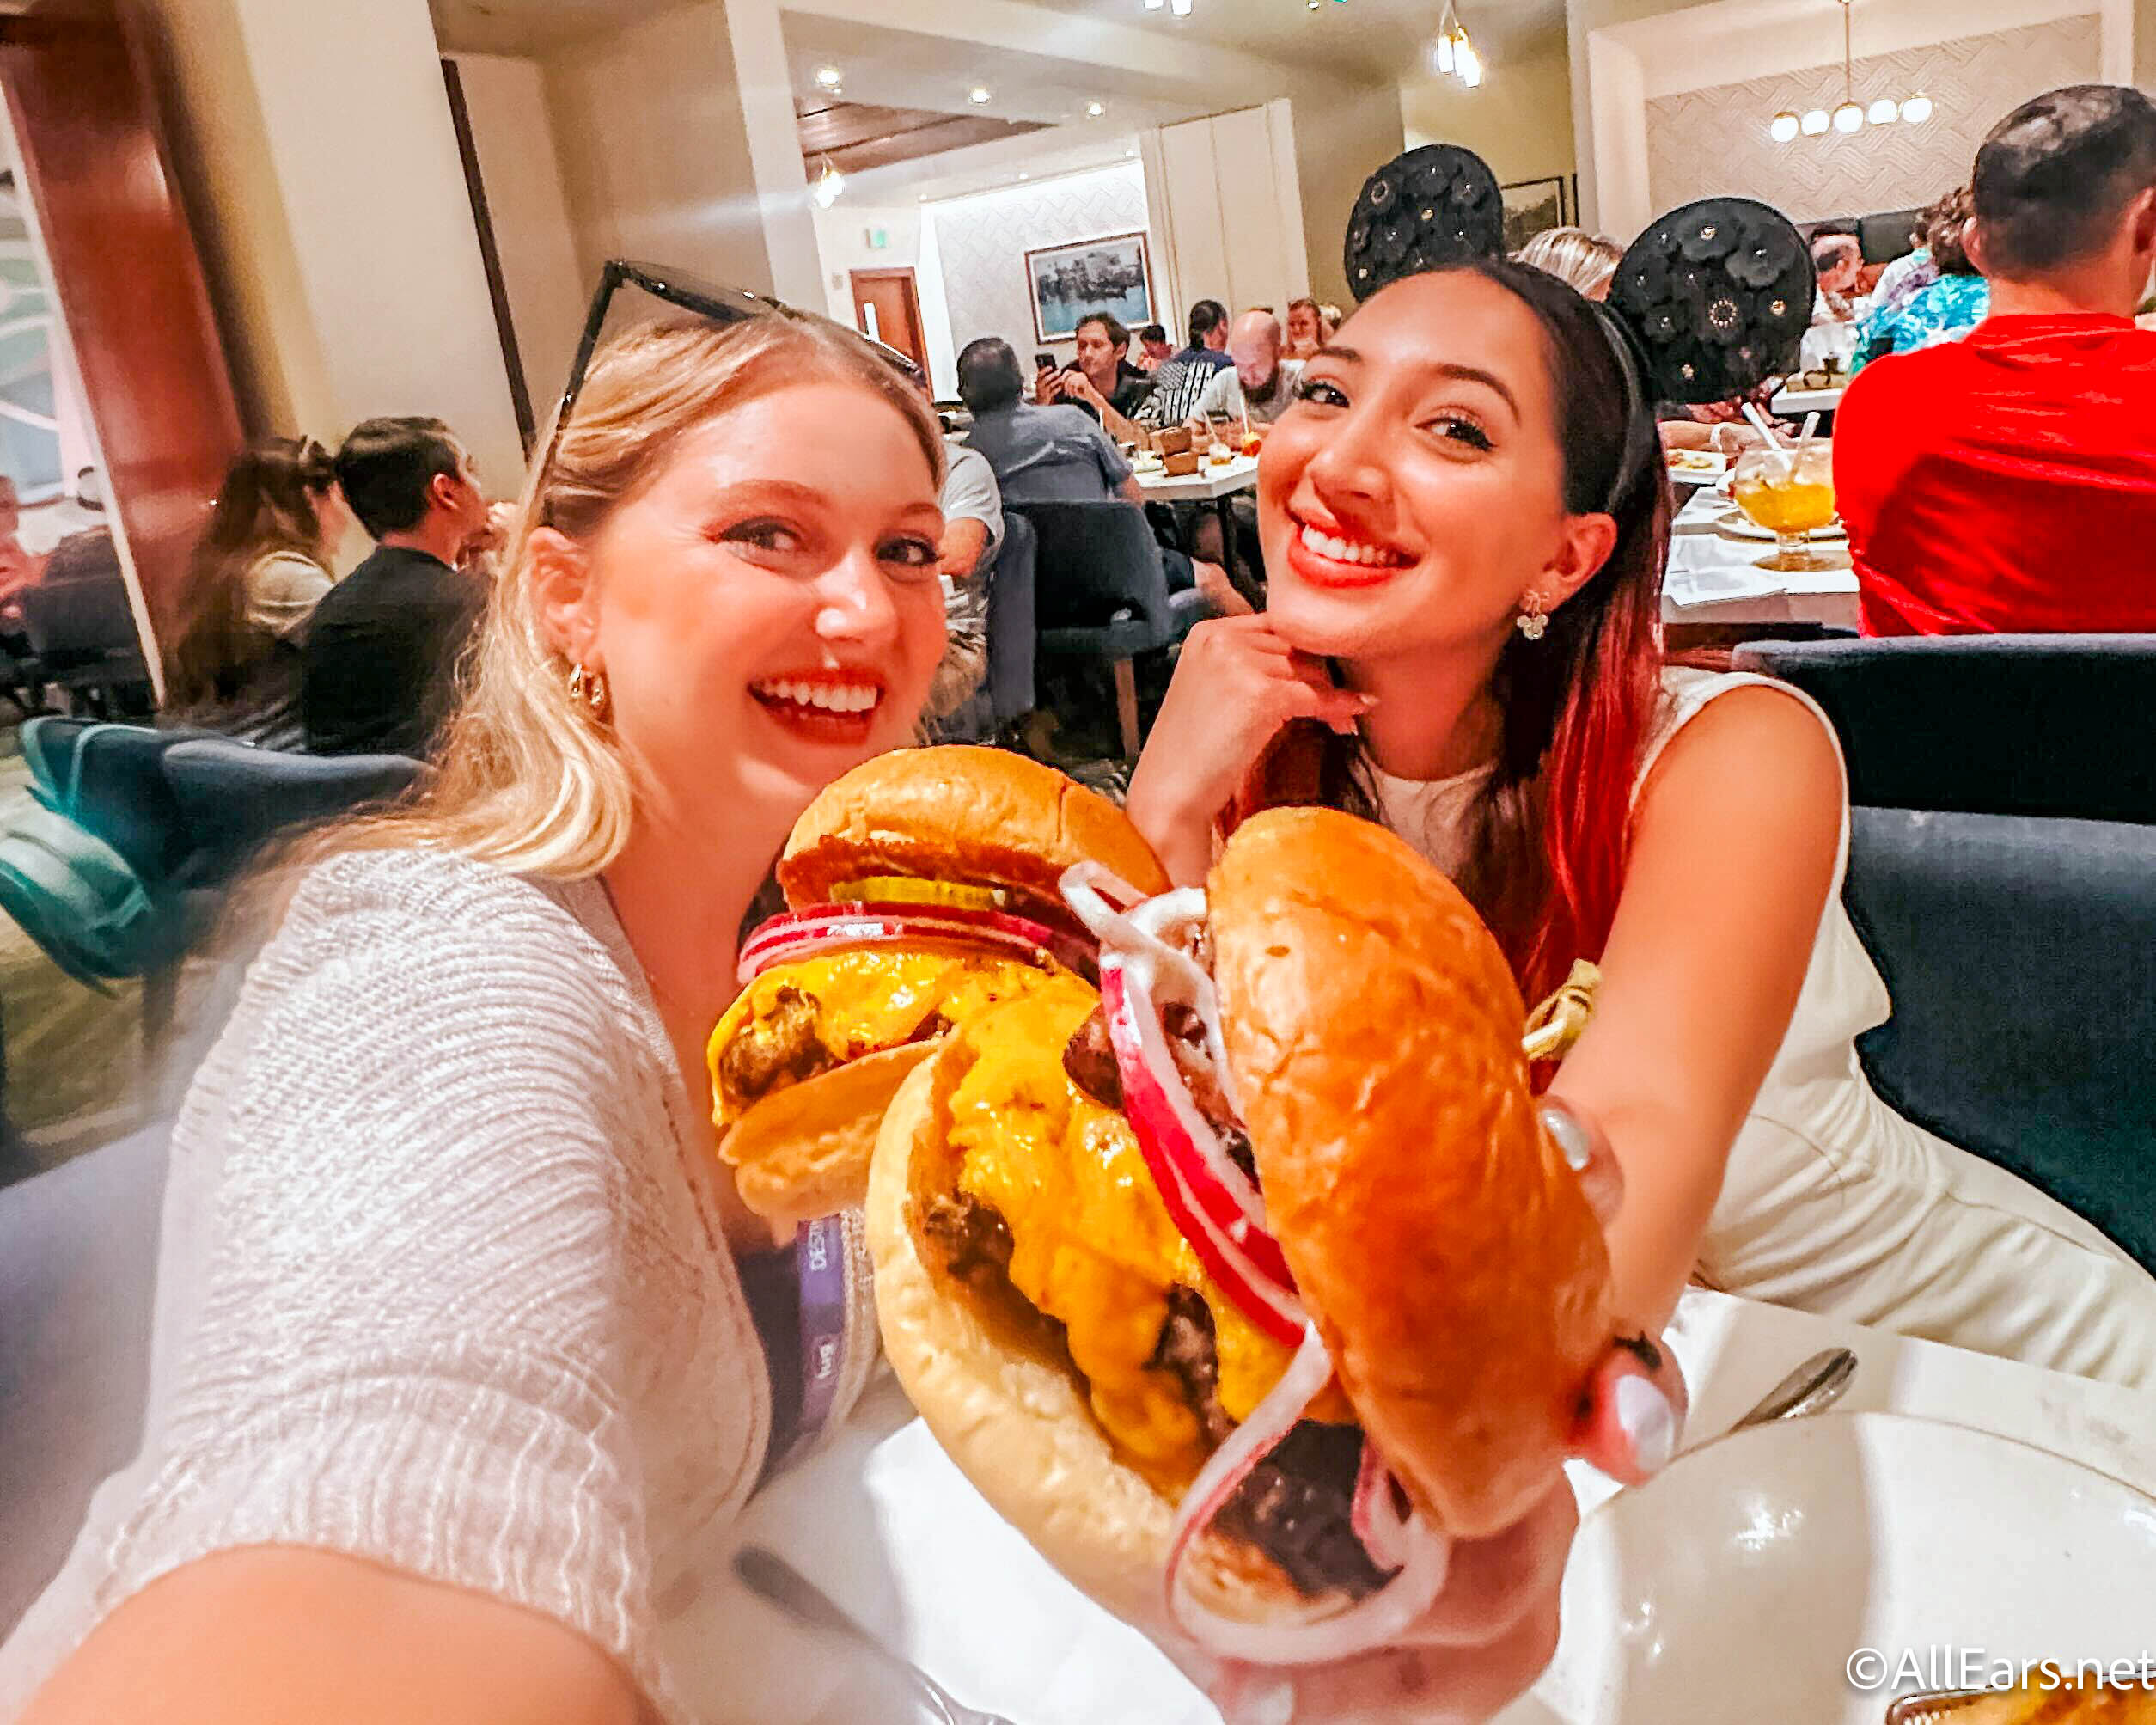 The Best (and Worst) Places to Get a Burger at Walt Disney World According to YOU!